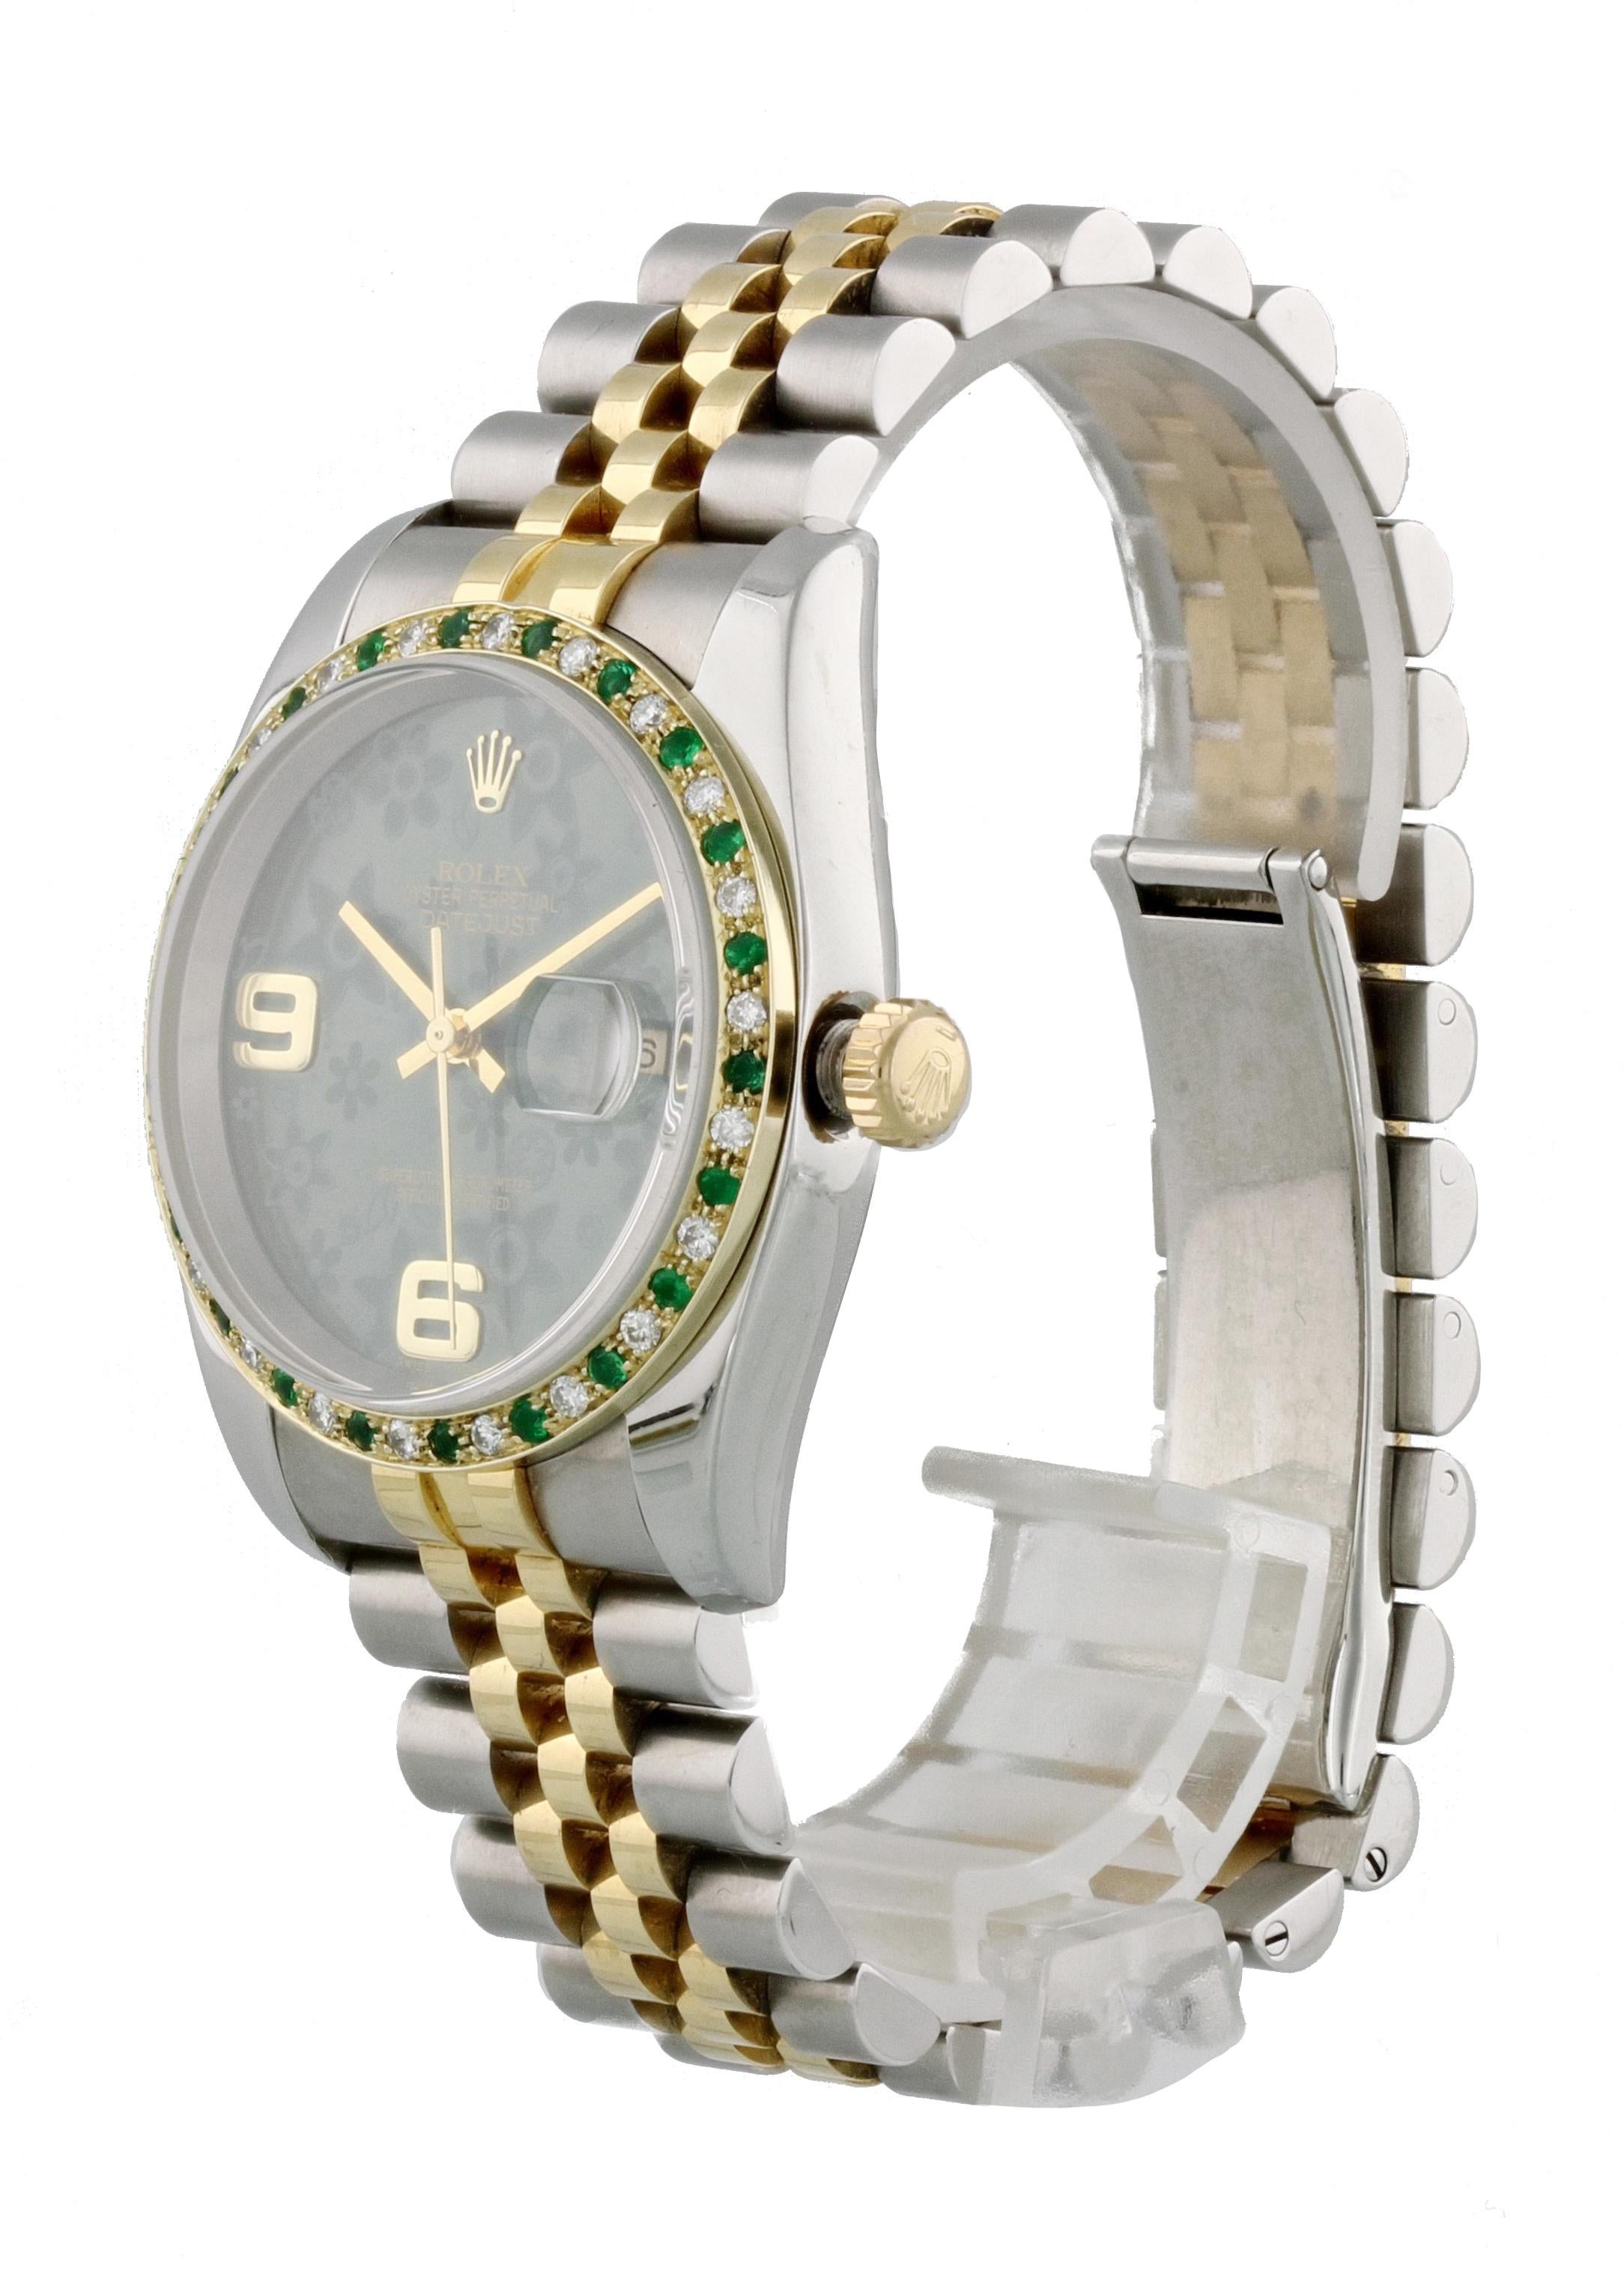 Rolex Datejust 116233 Men Watch. 36mm Stainless Steel case. Yellow Gold None bezel. Green Floral dial with gold hands and Arabic numeral hour markers. Date display at the 3 o'clock position. Stainless Steel Bracelet with Fold Over Clasp. Will fit up